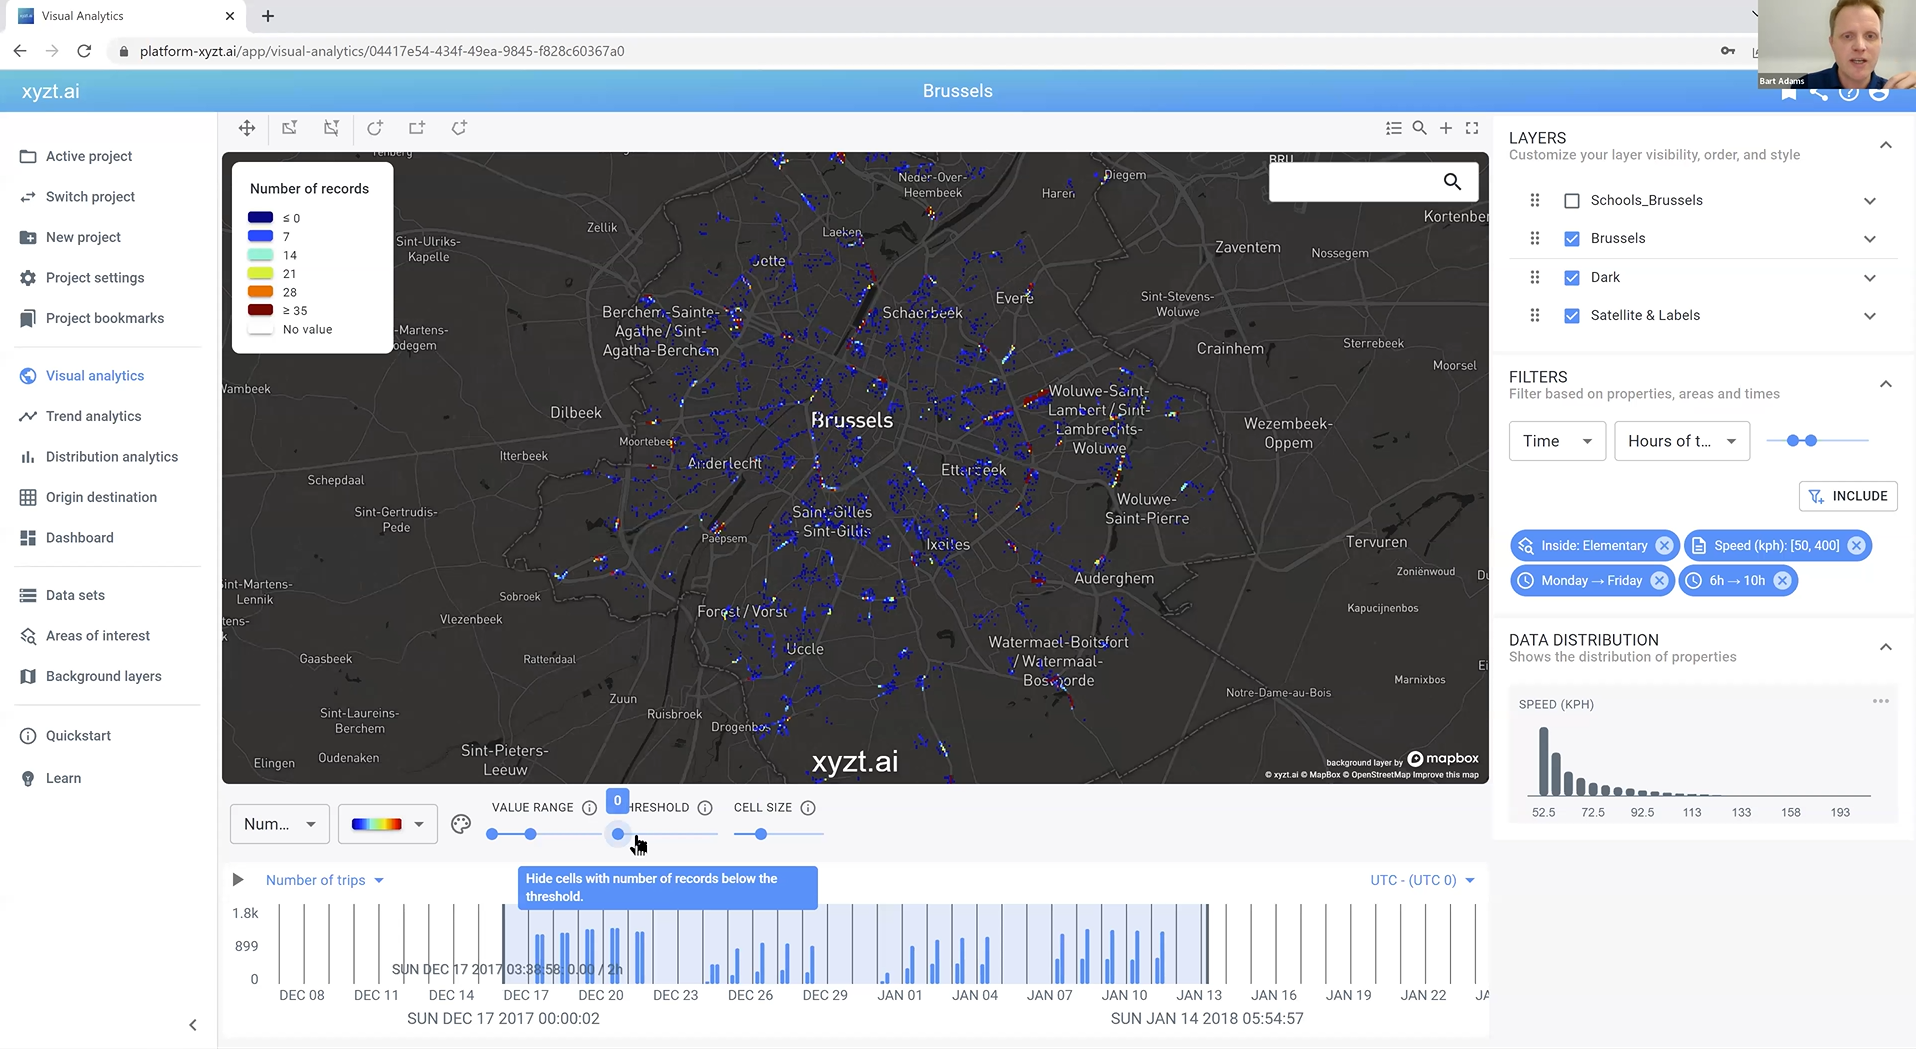 Trips data filtered to only display dangerous traffic activity inside the areas of interest.